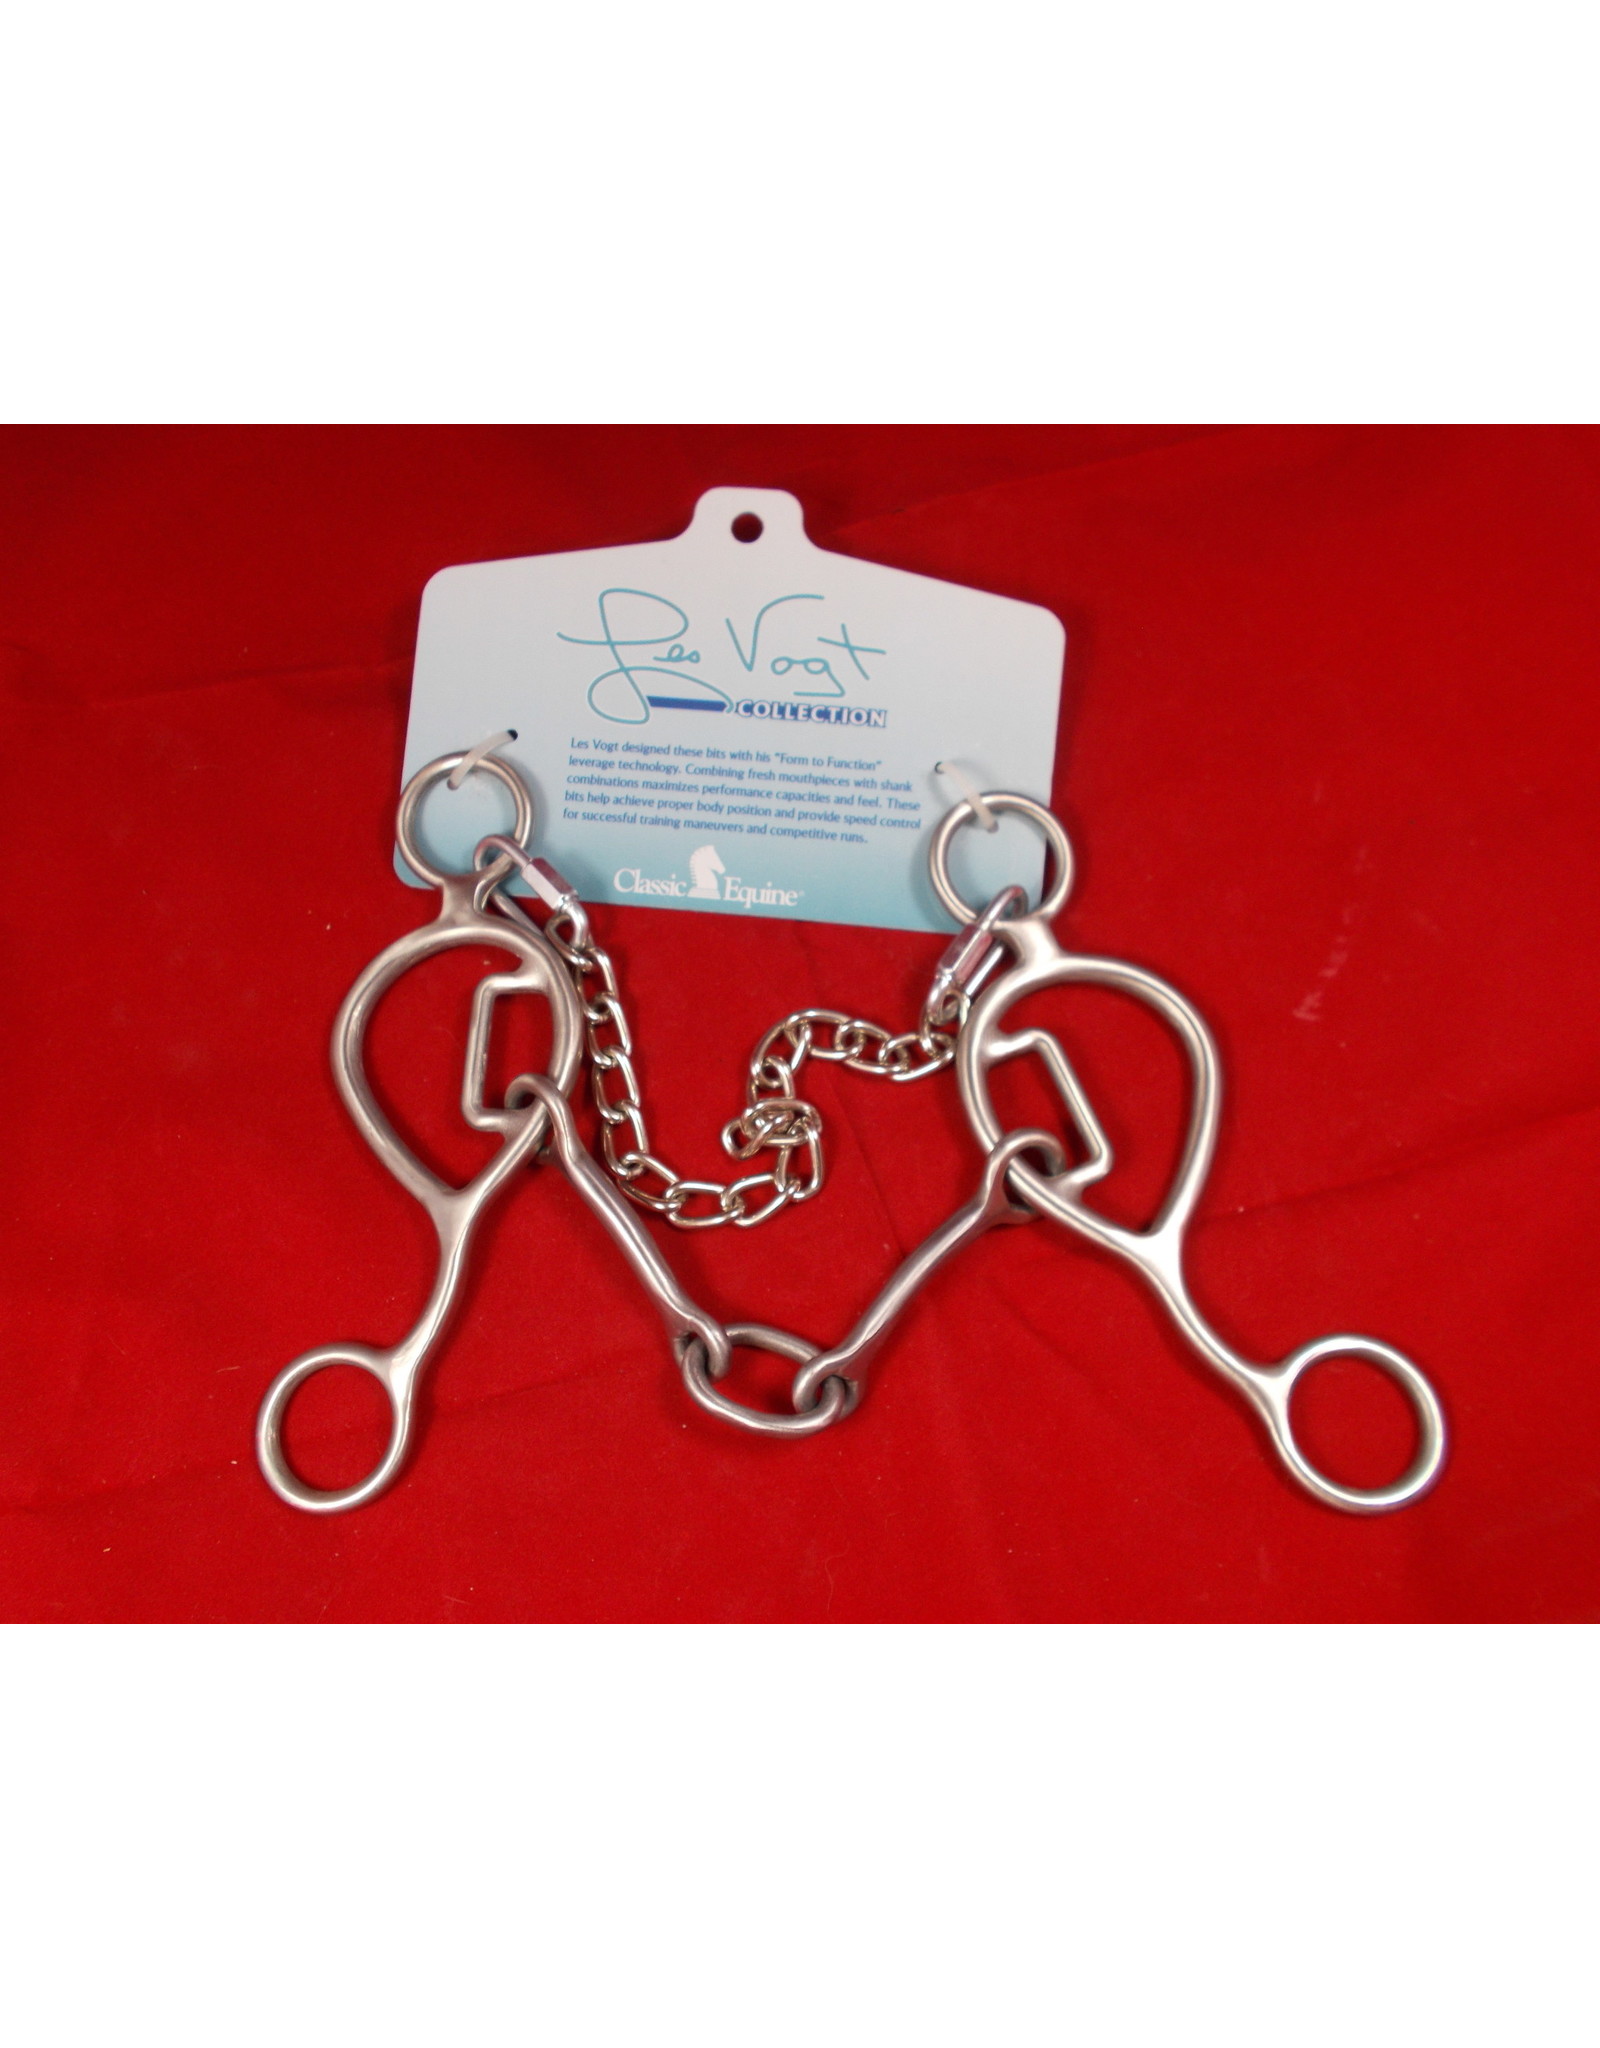 Les Vogt 6 1/2"  Shank O Ring Snaffle Bit -LVBB8 Turbo Collection